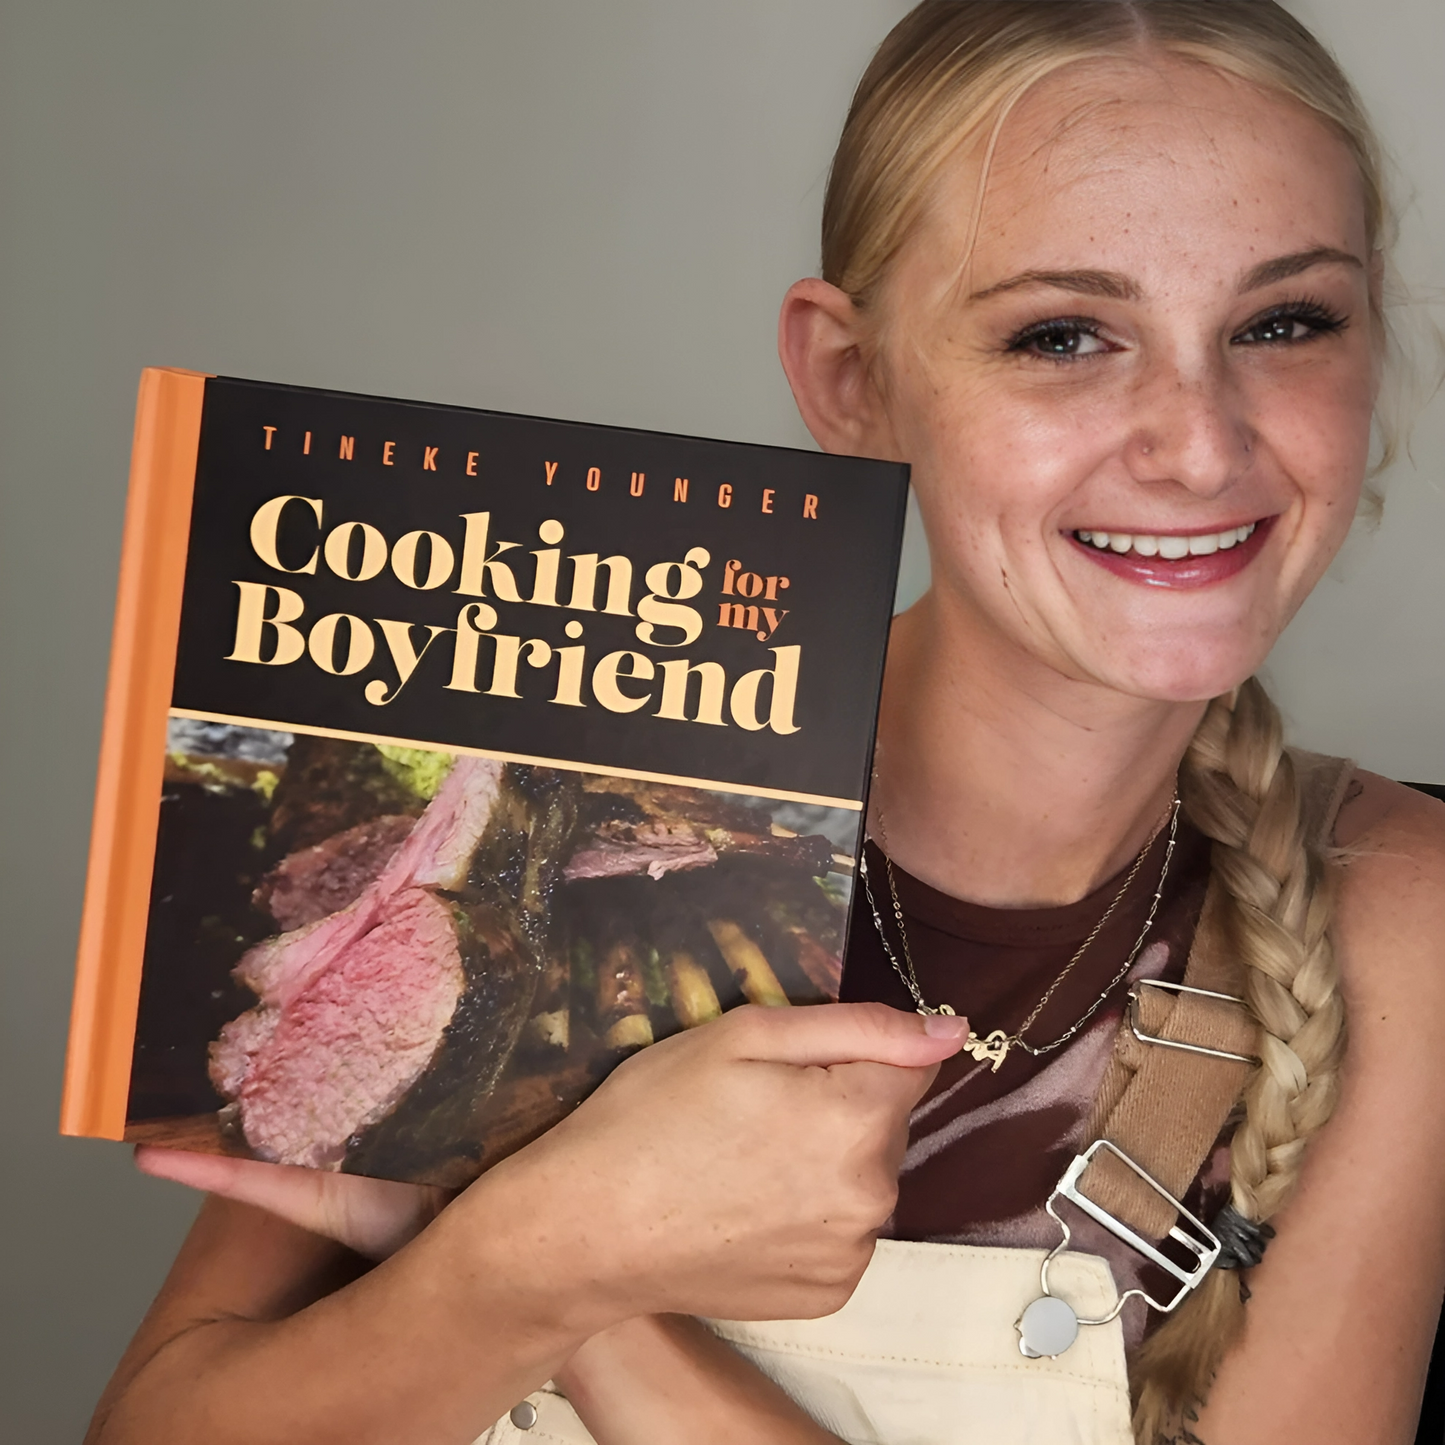 Tini's Cookbook - Cooking For My Boy Friend PDF